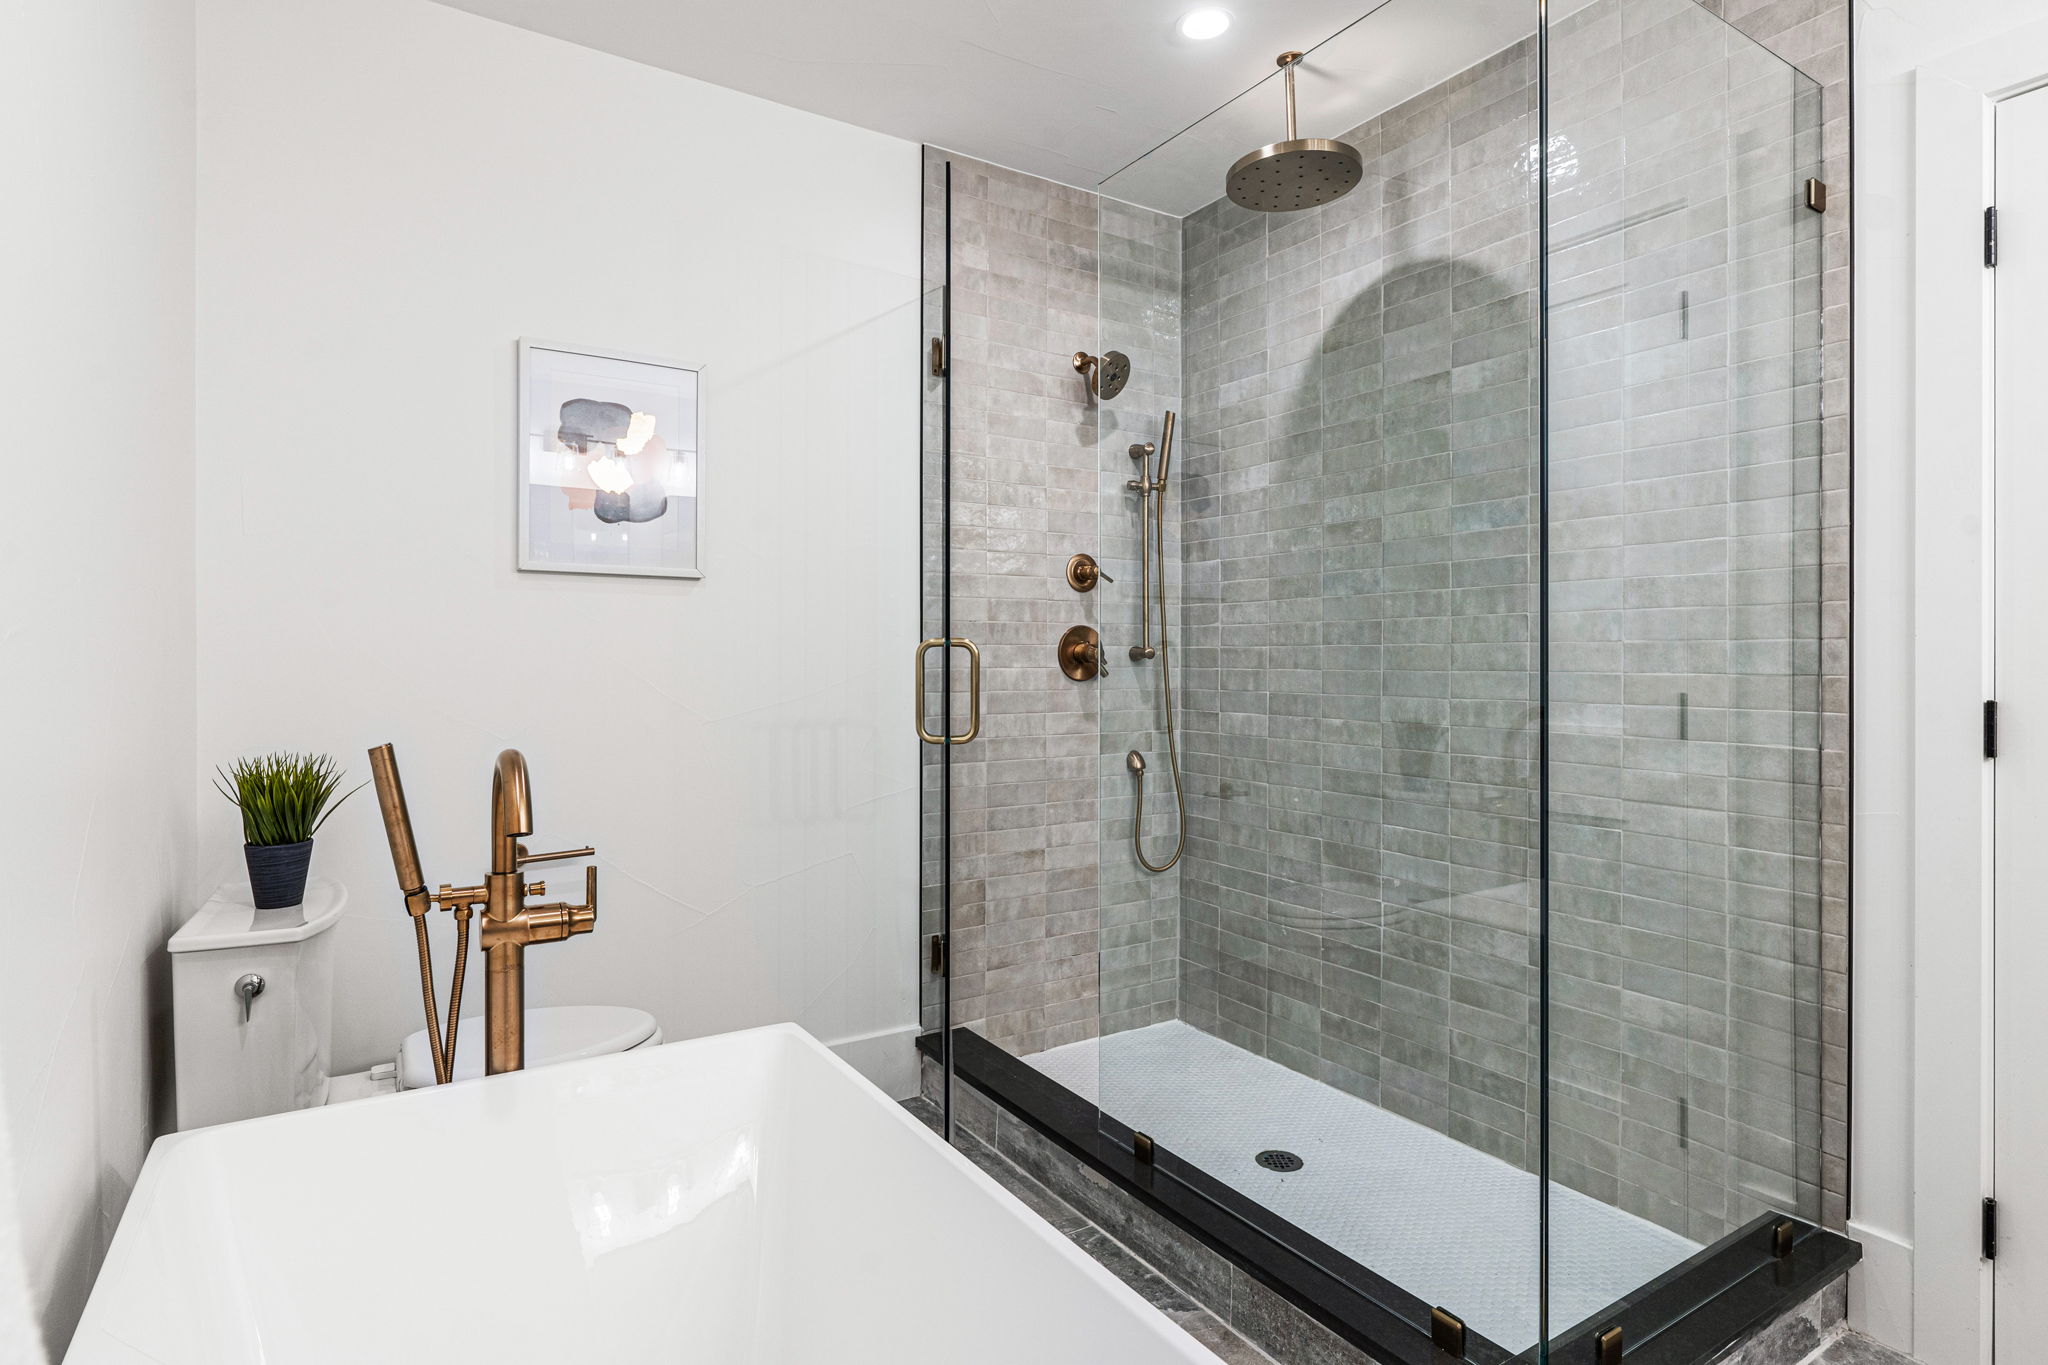 The spacious walk-in shower features a glass surround, large rain head, and handheld shower head